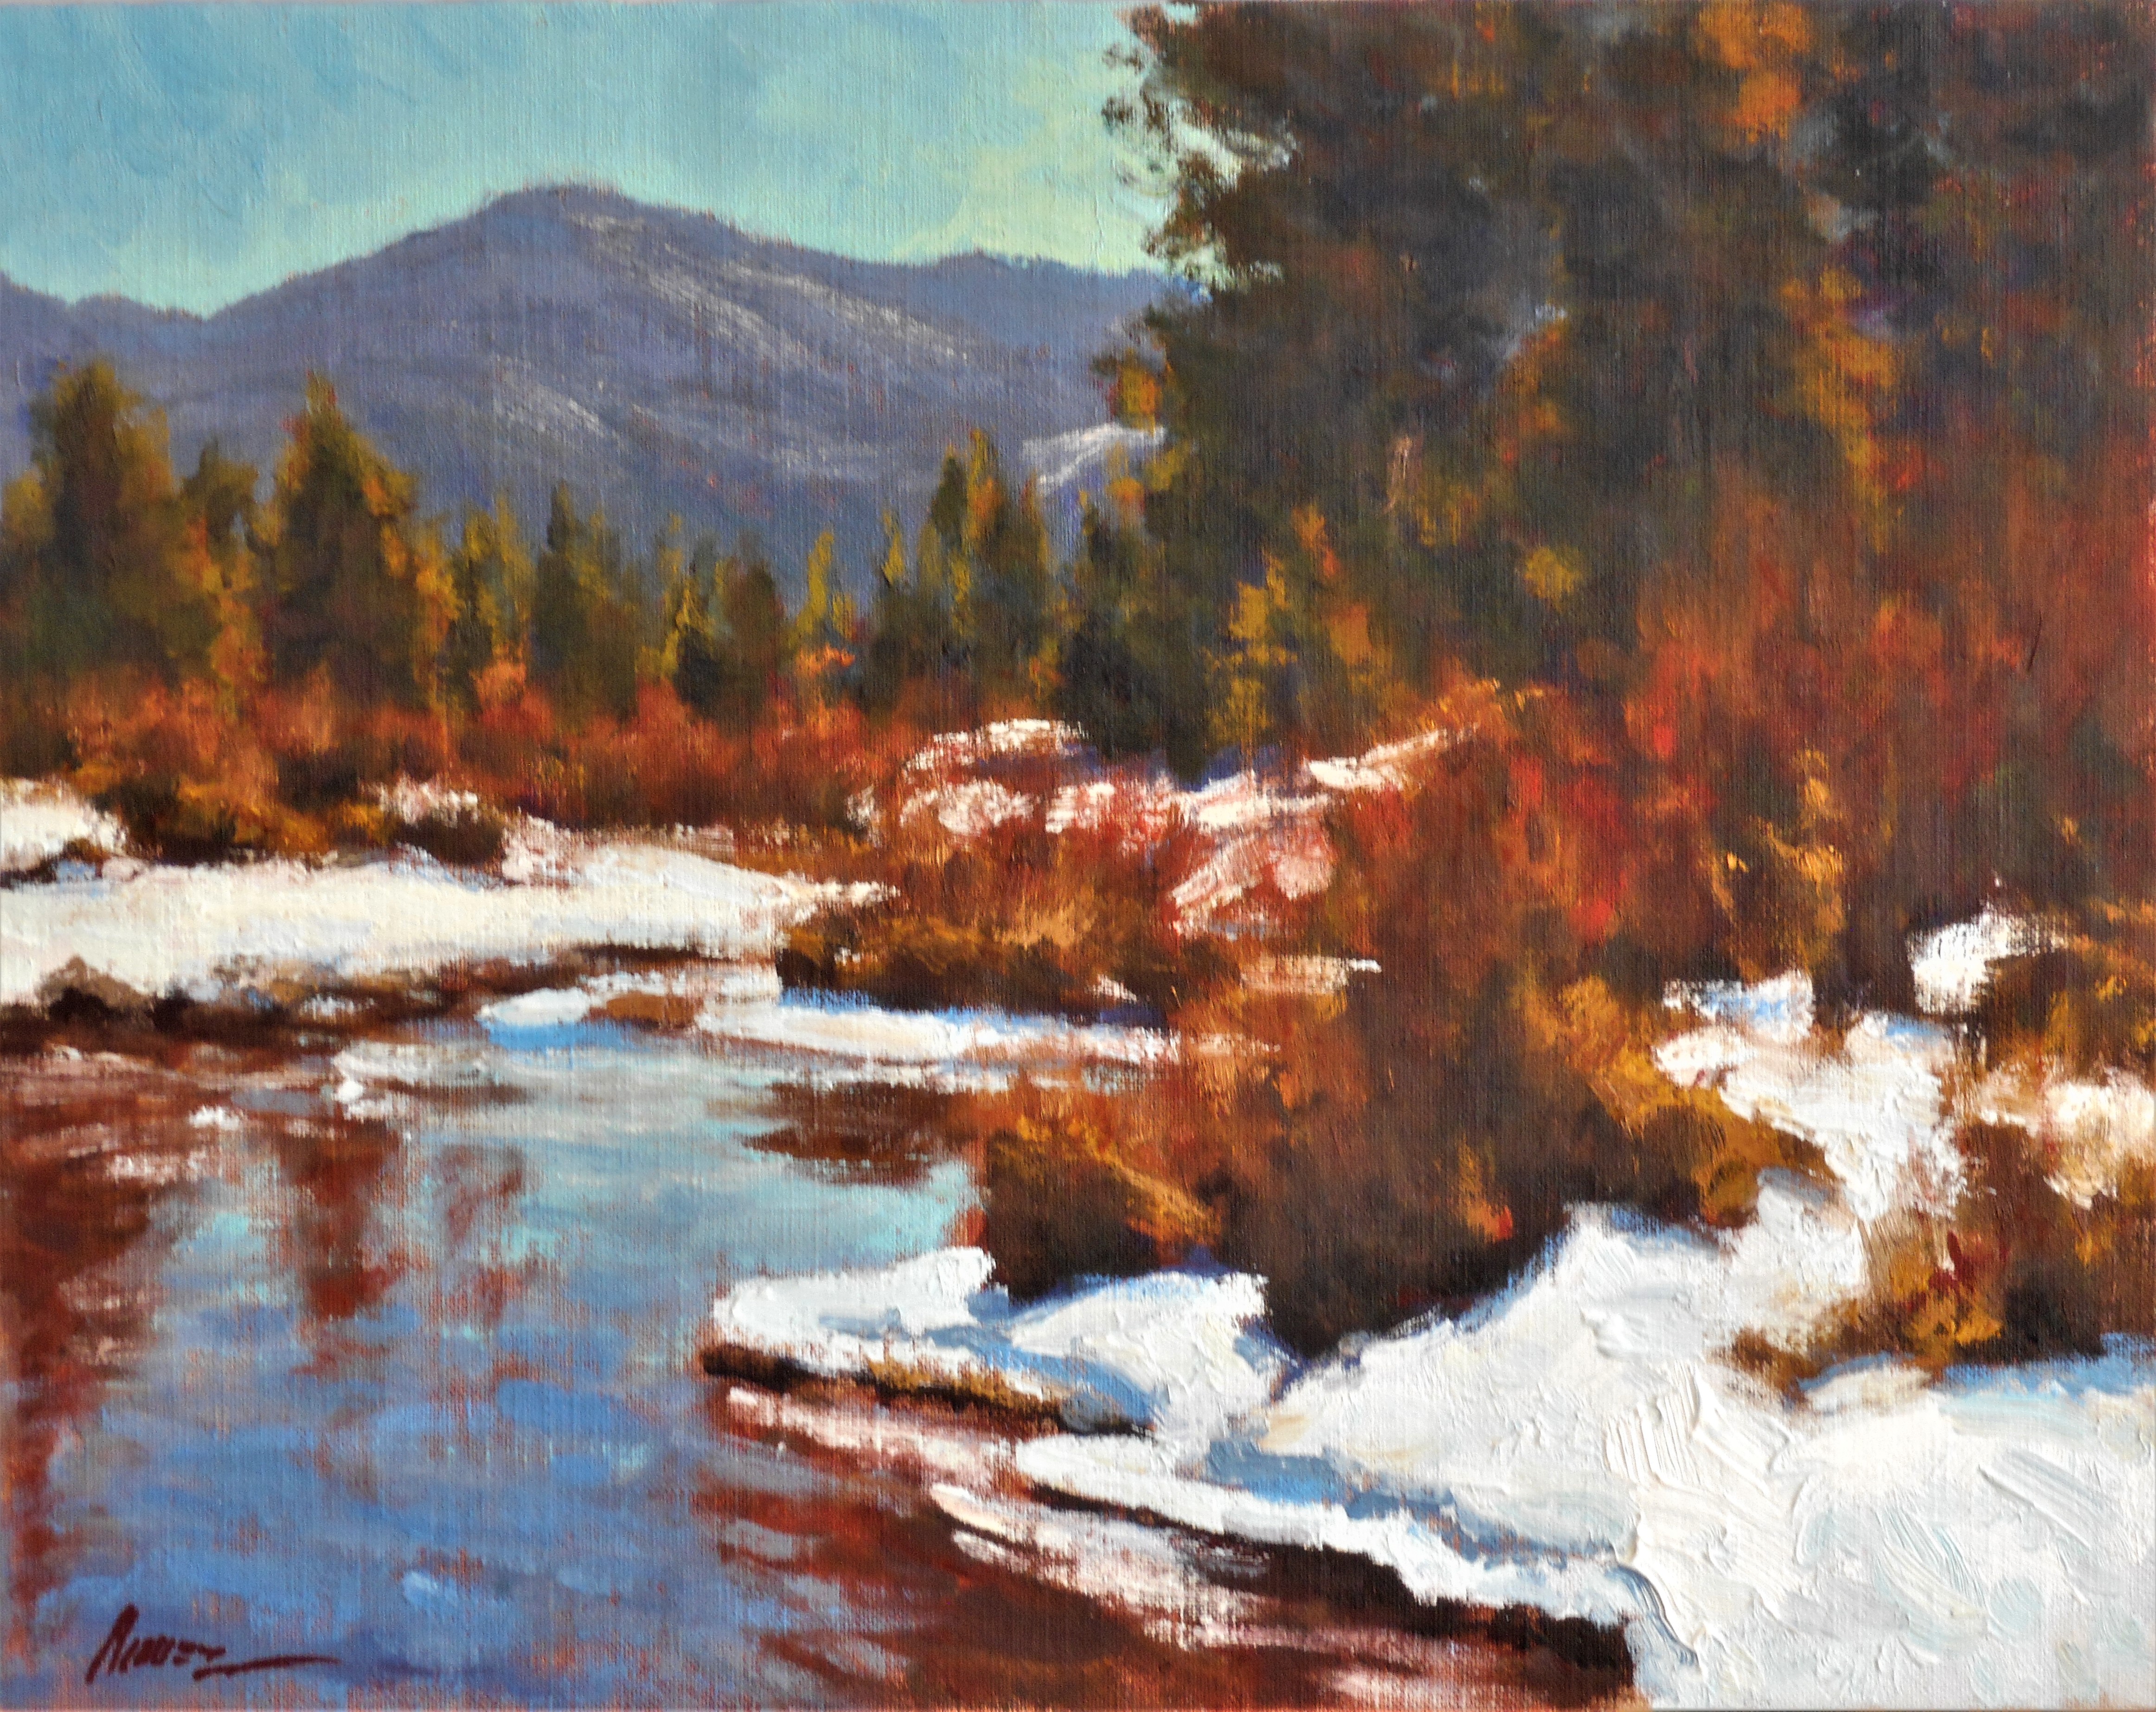 Painting Landscapes: Outdoors - May